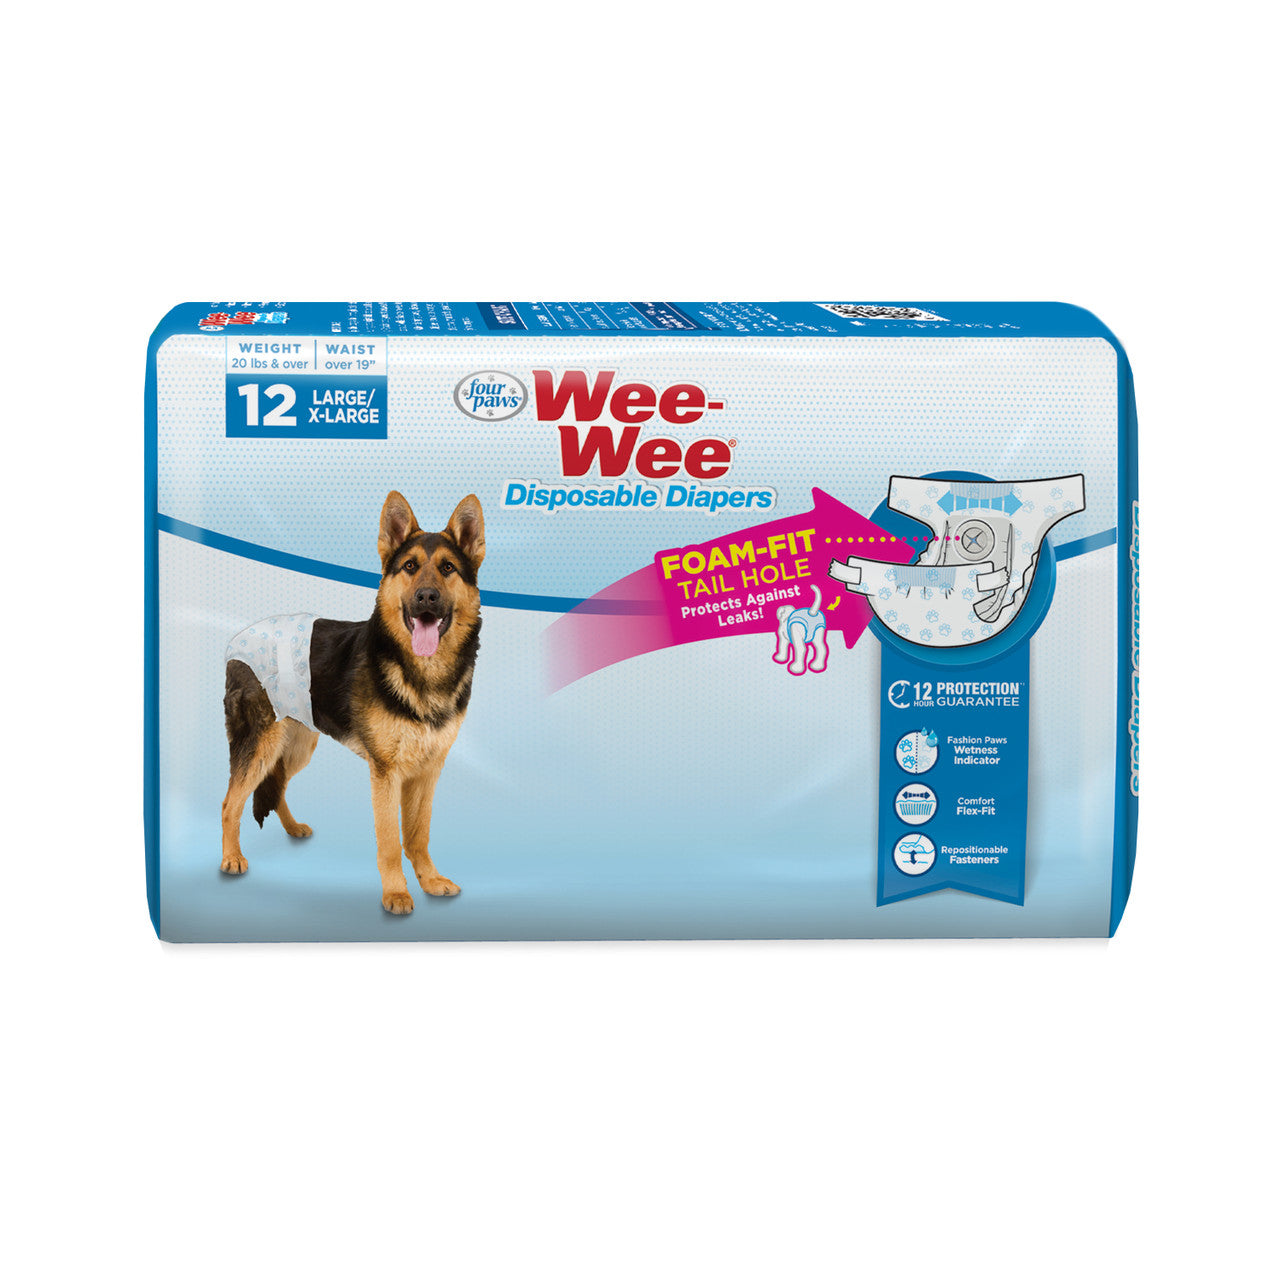 Four Paws Wee-Wee Disposable Dog Diapers Large / X-Large (12 Count)